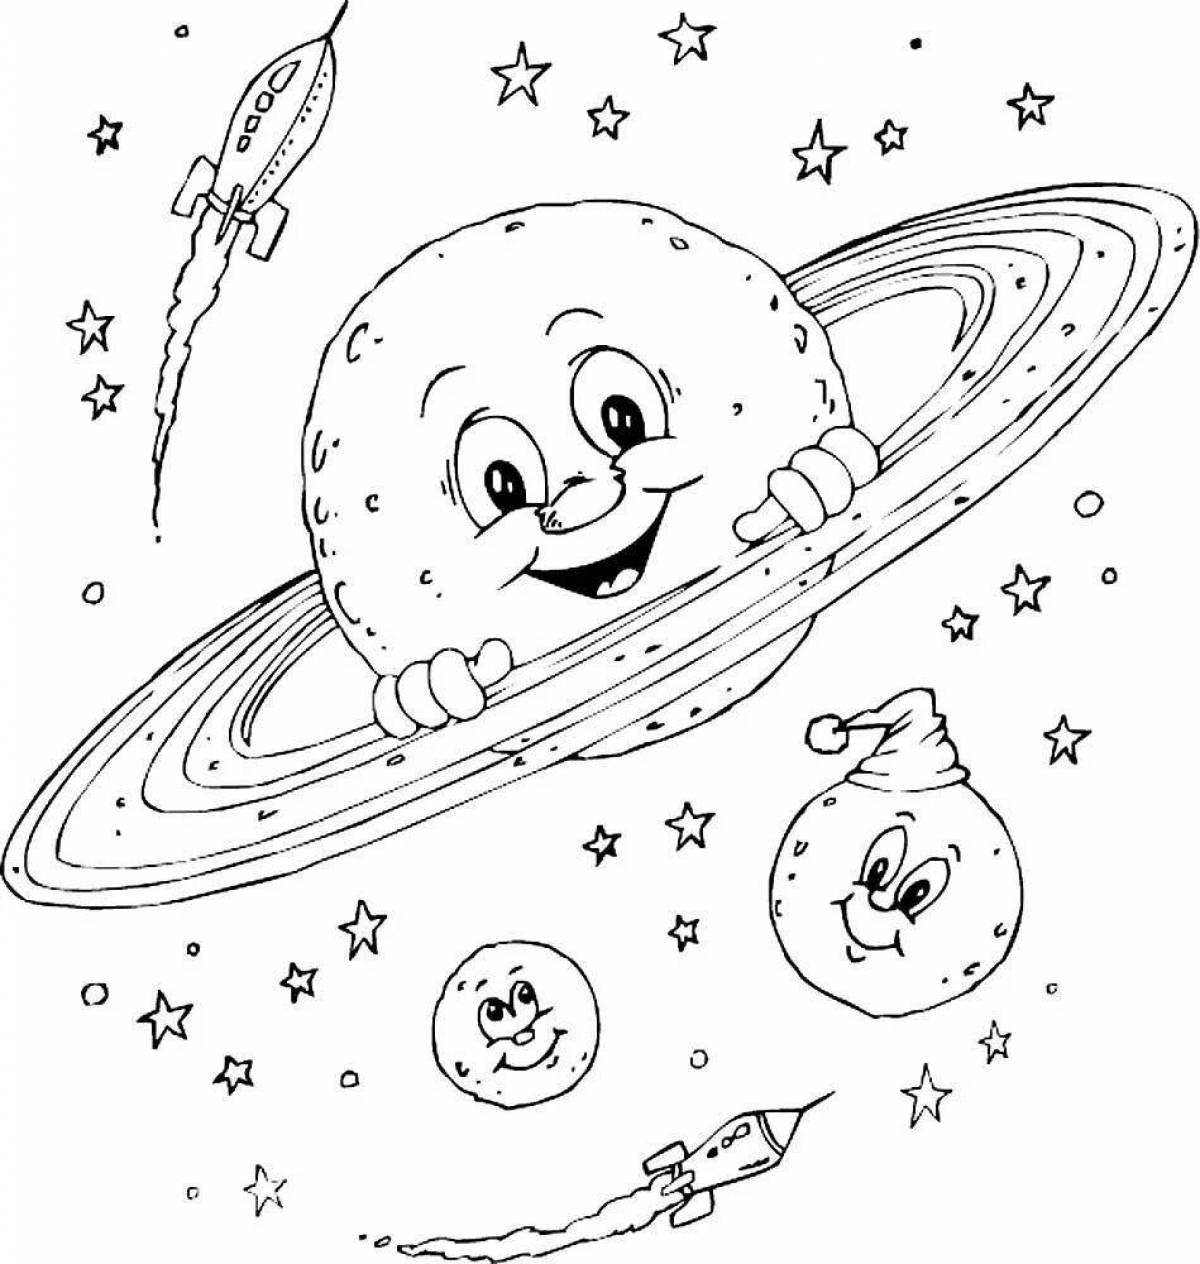 Live space and planets coloring pages for kids